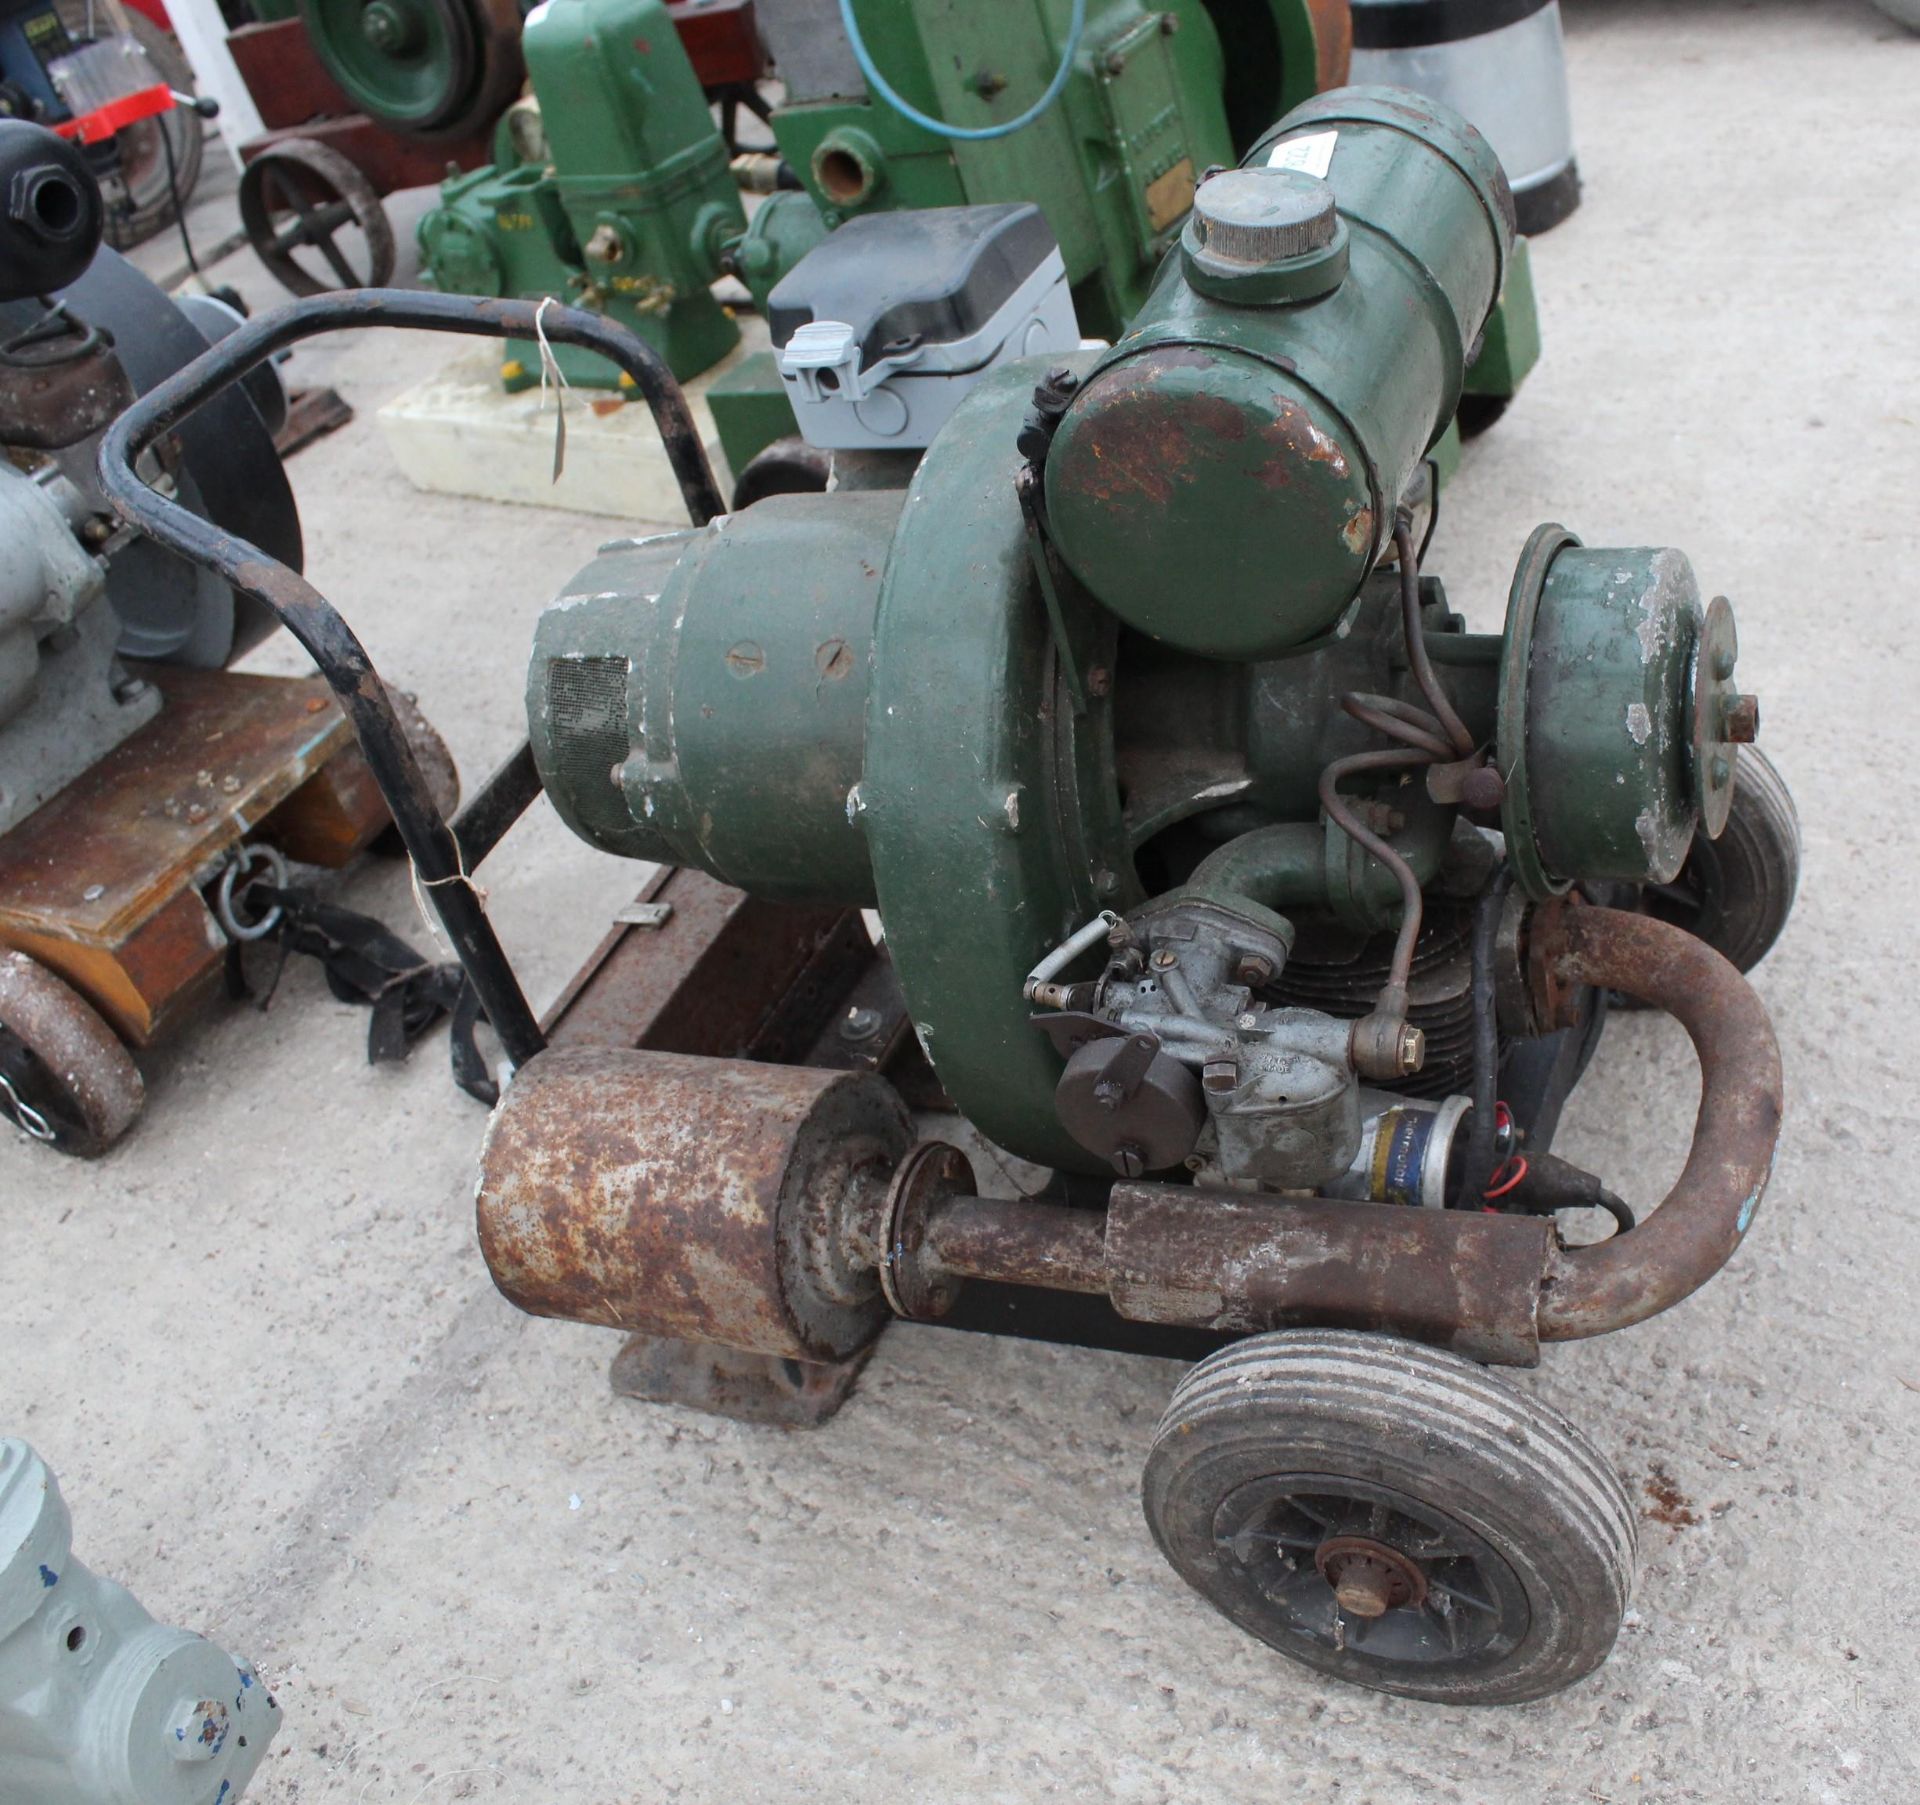 A VINTAGE HOMELITE PETROL GENERATOR ON A FOUR WHEELED TROLLEY BASE (MODERN ELECTRICAL ADDITIONS)